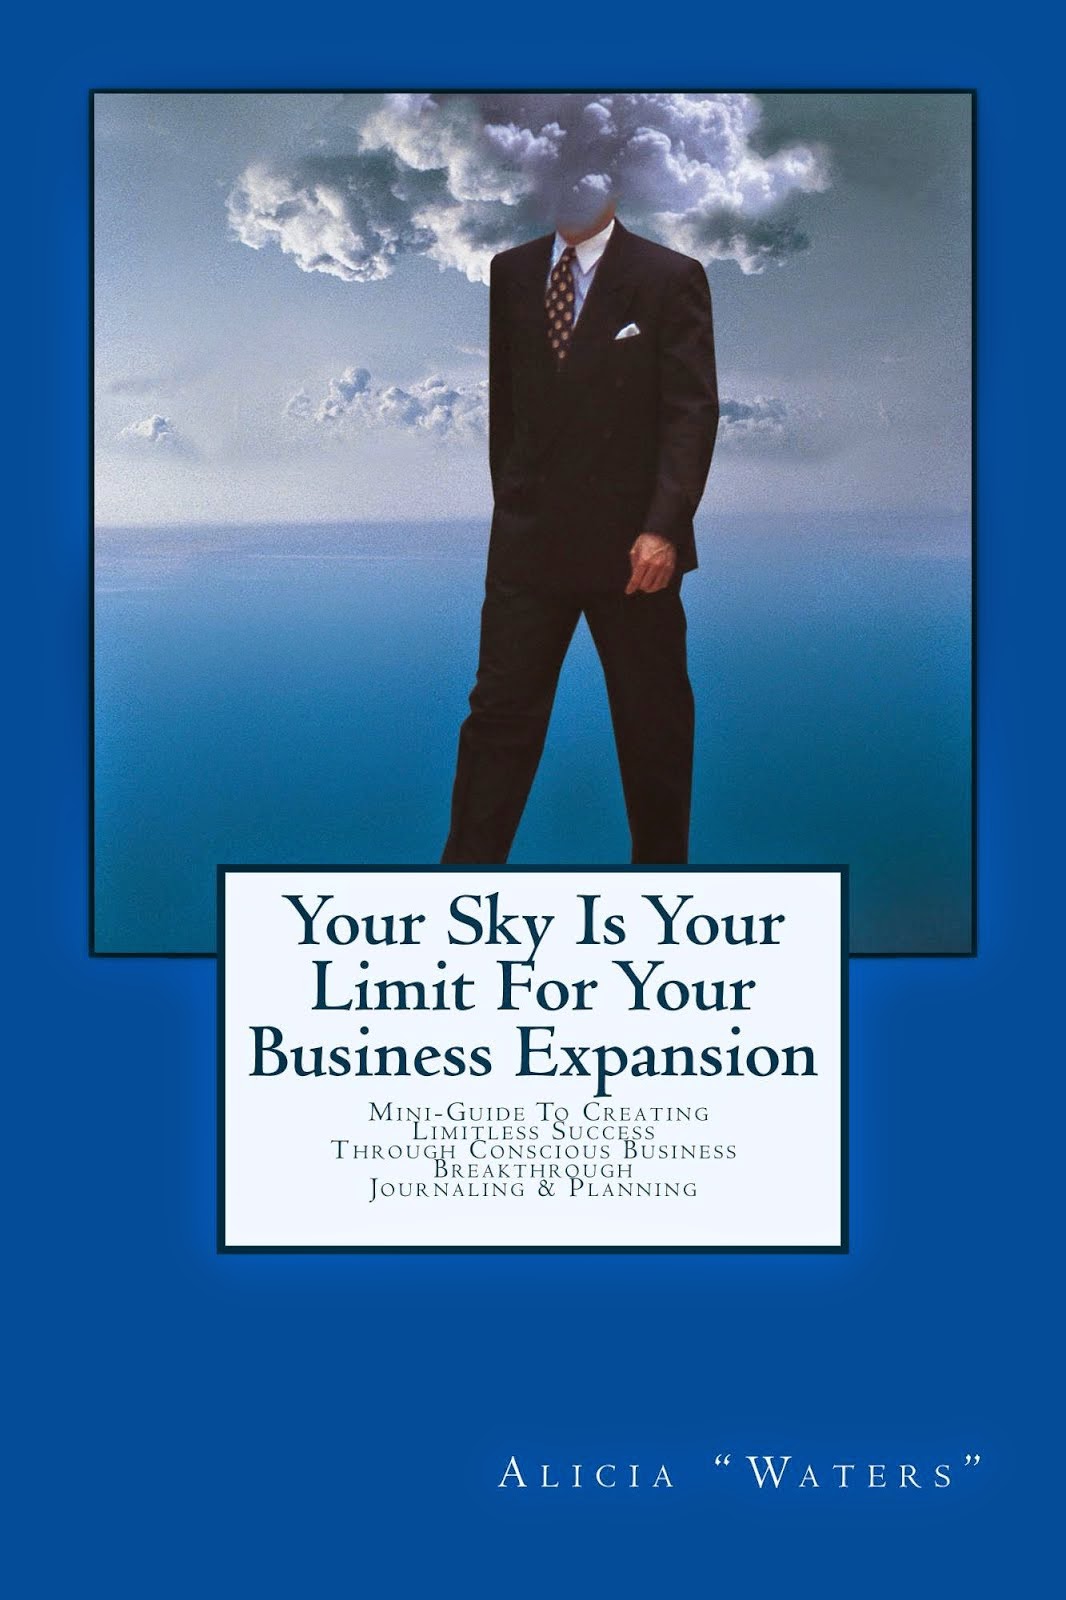 Your Sky Is Your Limit For Your Business Expansion